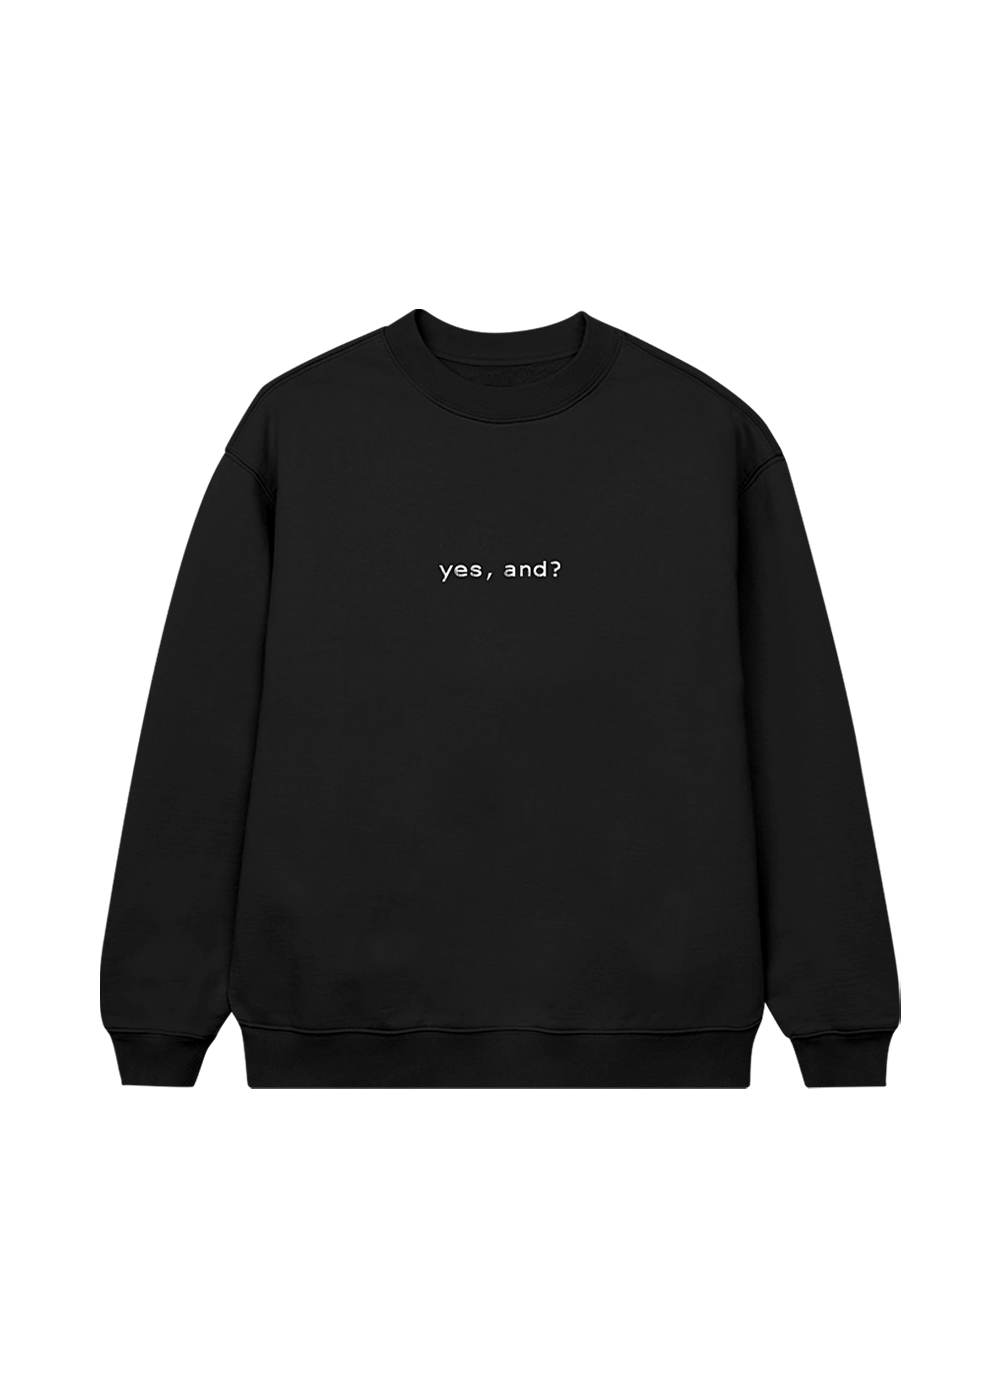 yes, and? crewneck front